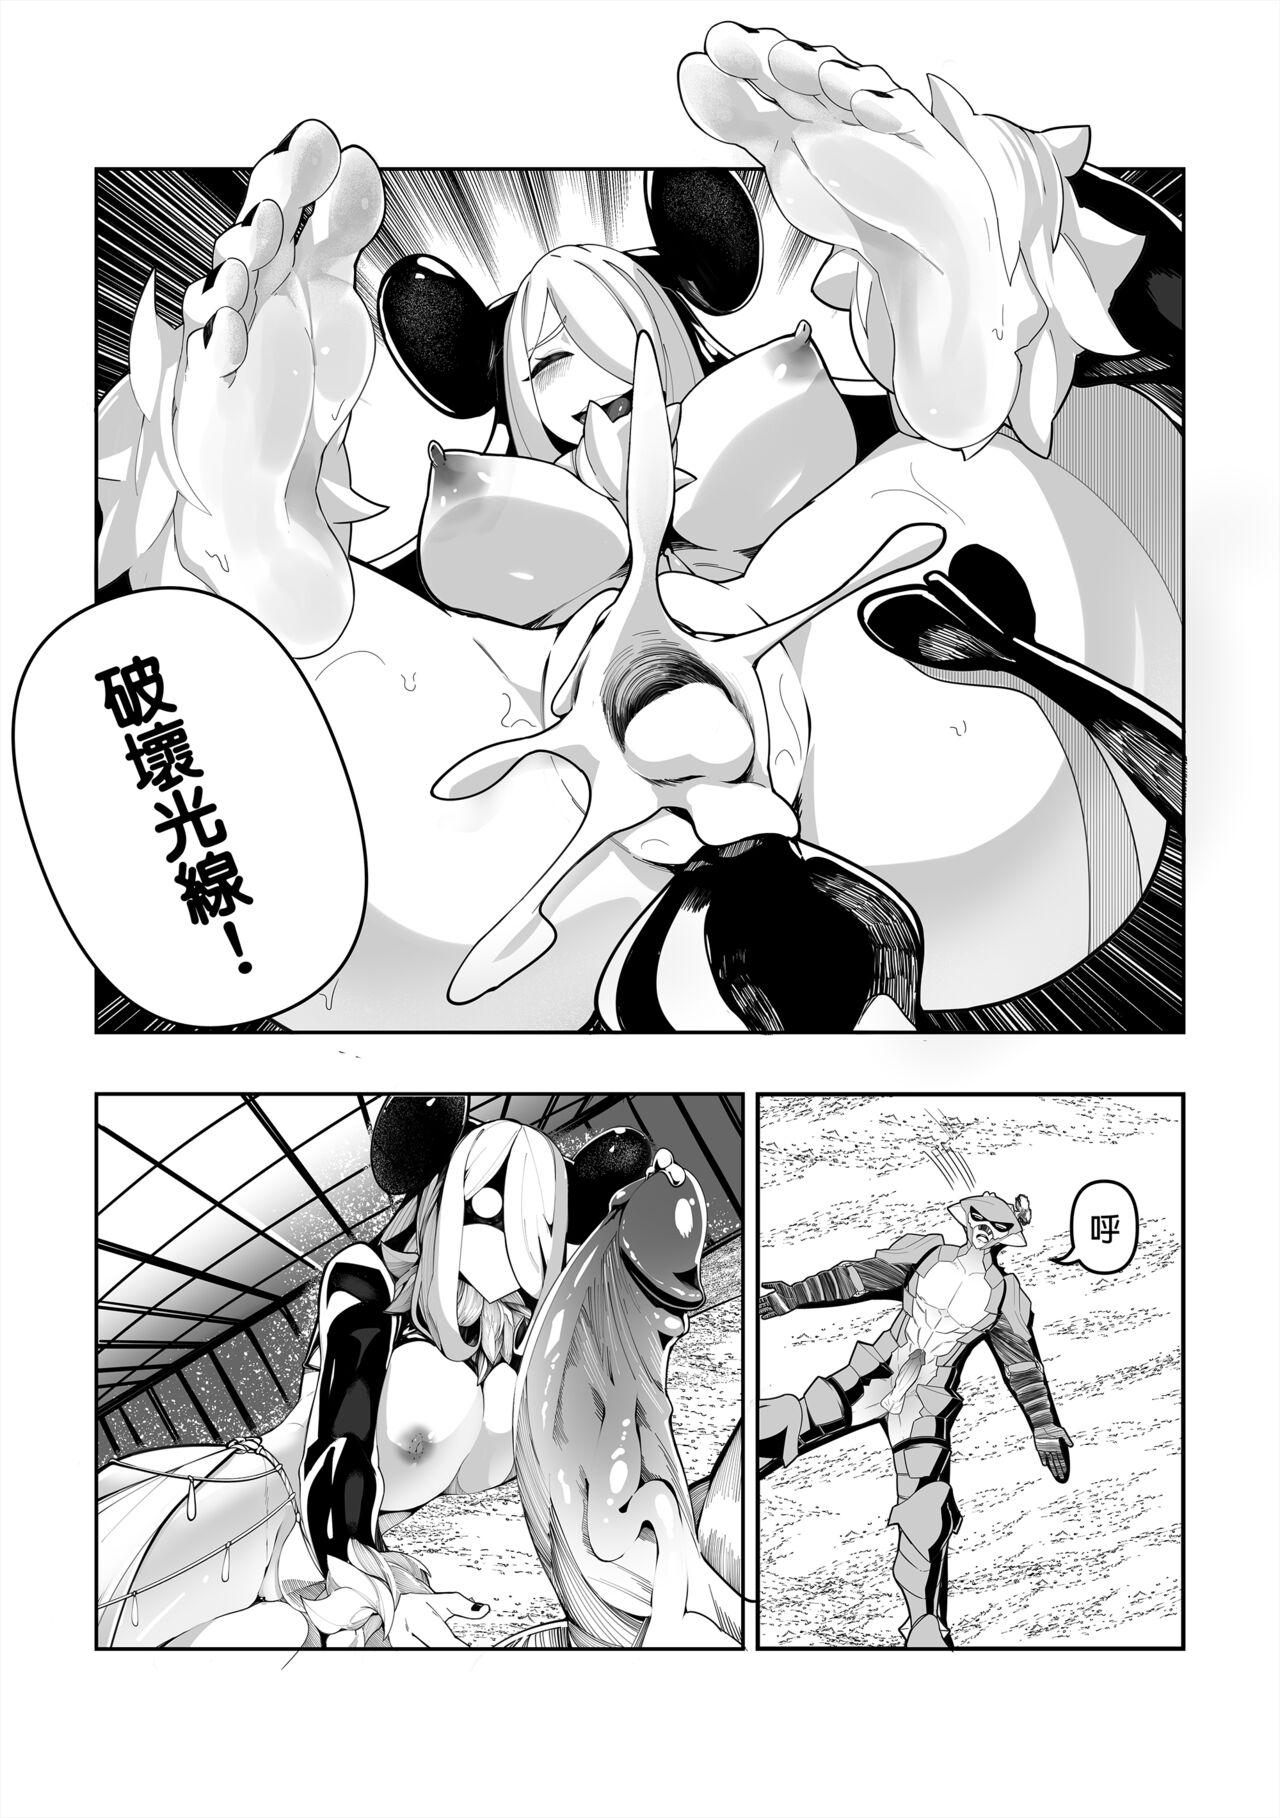 Reversecowgirl 白濁的冠軍之戰! - Pokemon | pocket monsters Cream - Page 11